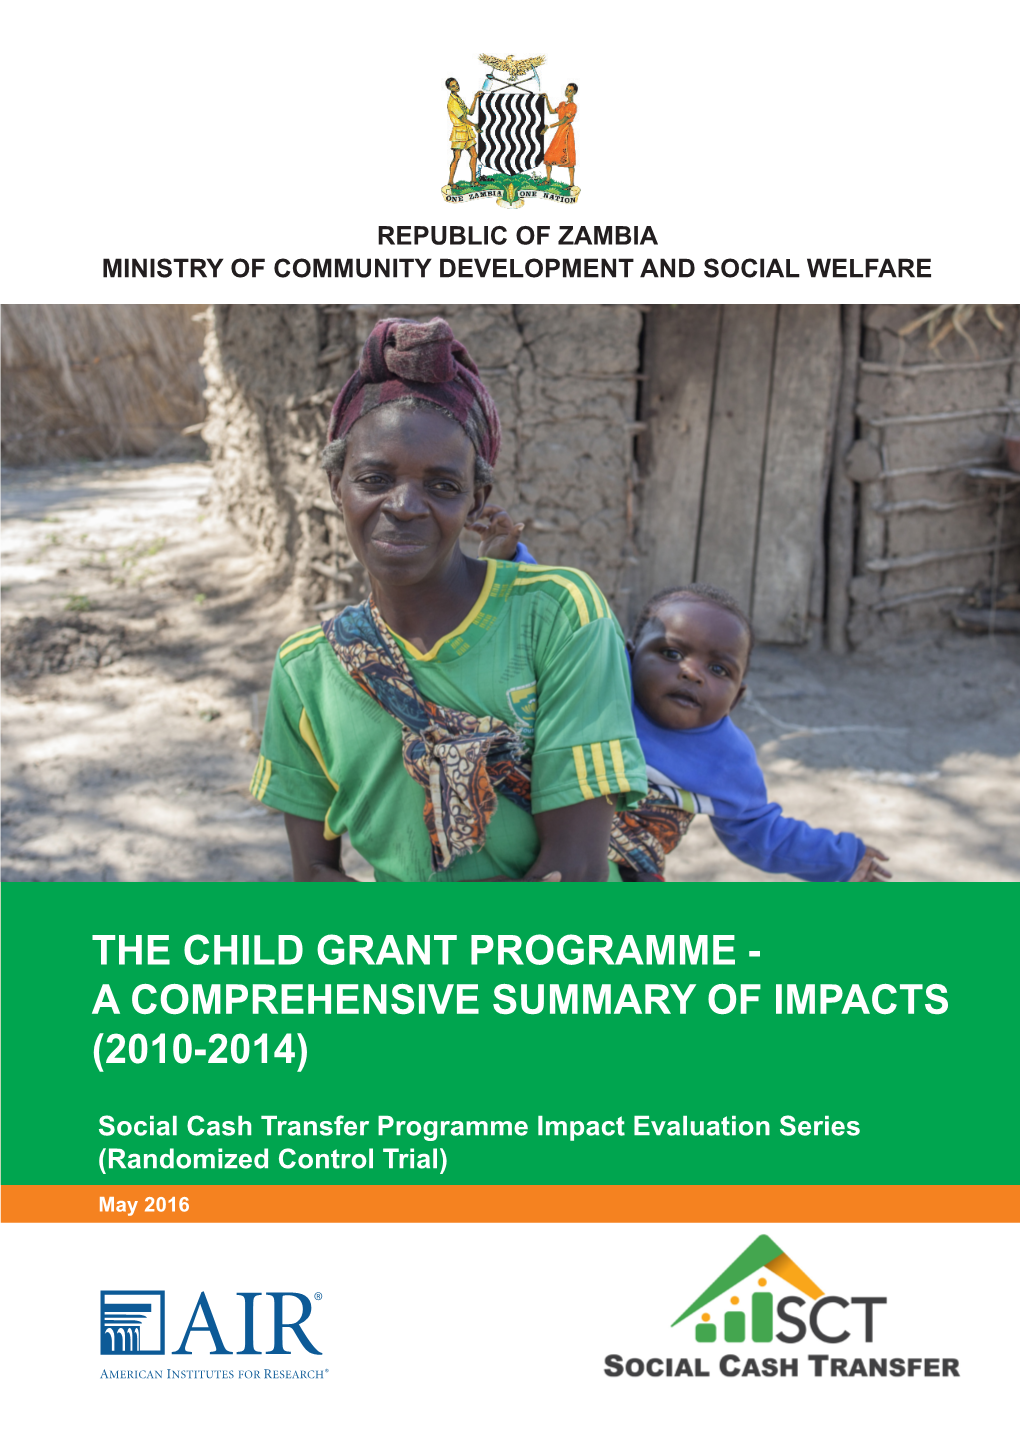 The Child Grant Programme - a Comprehensive Summary of Impacts (2010-2014)